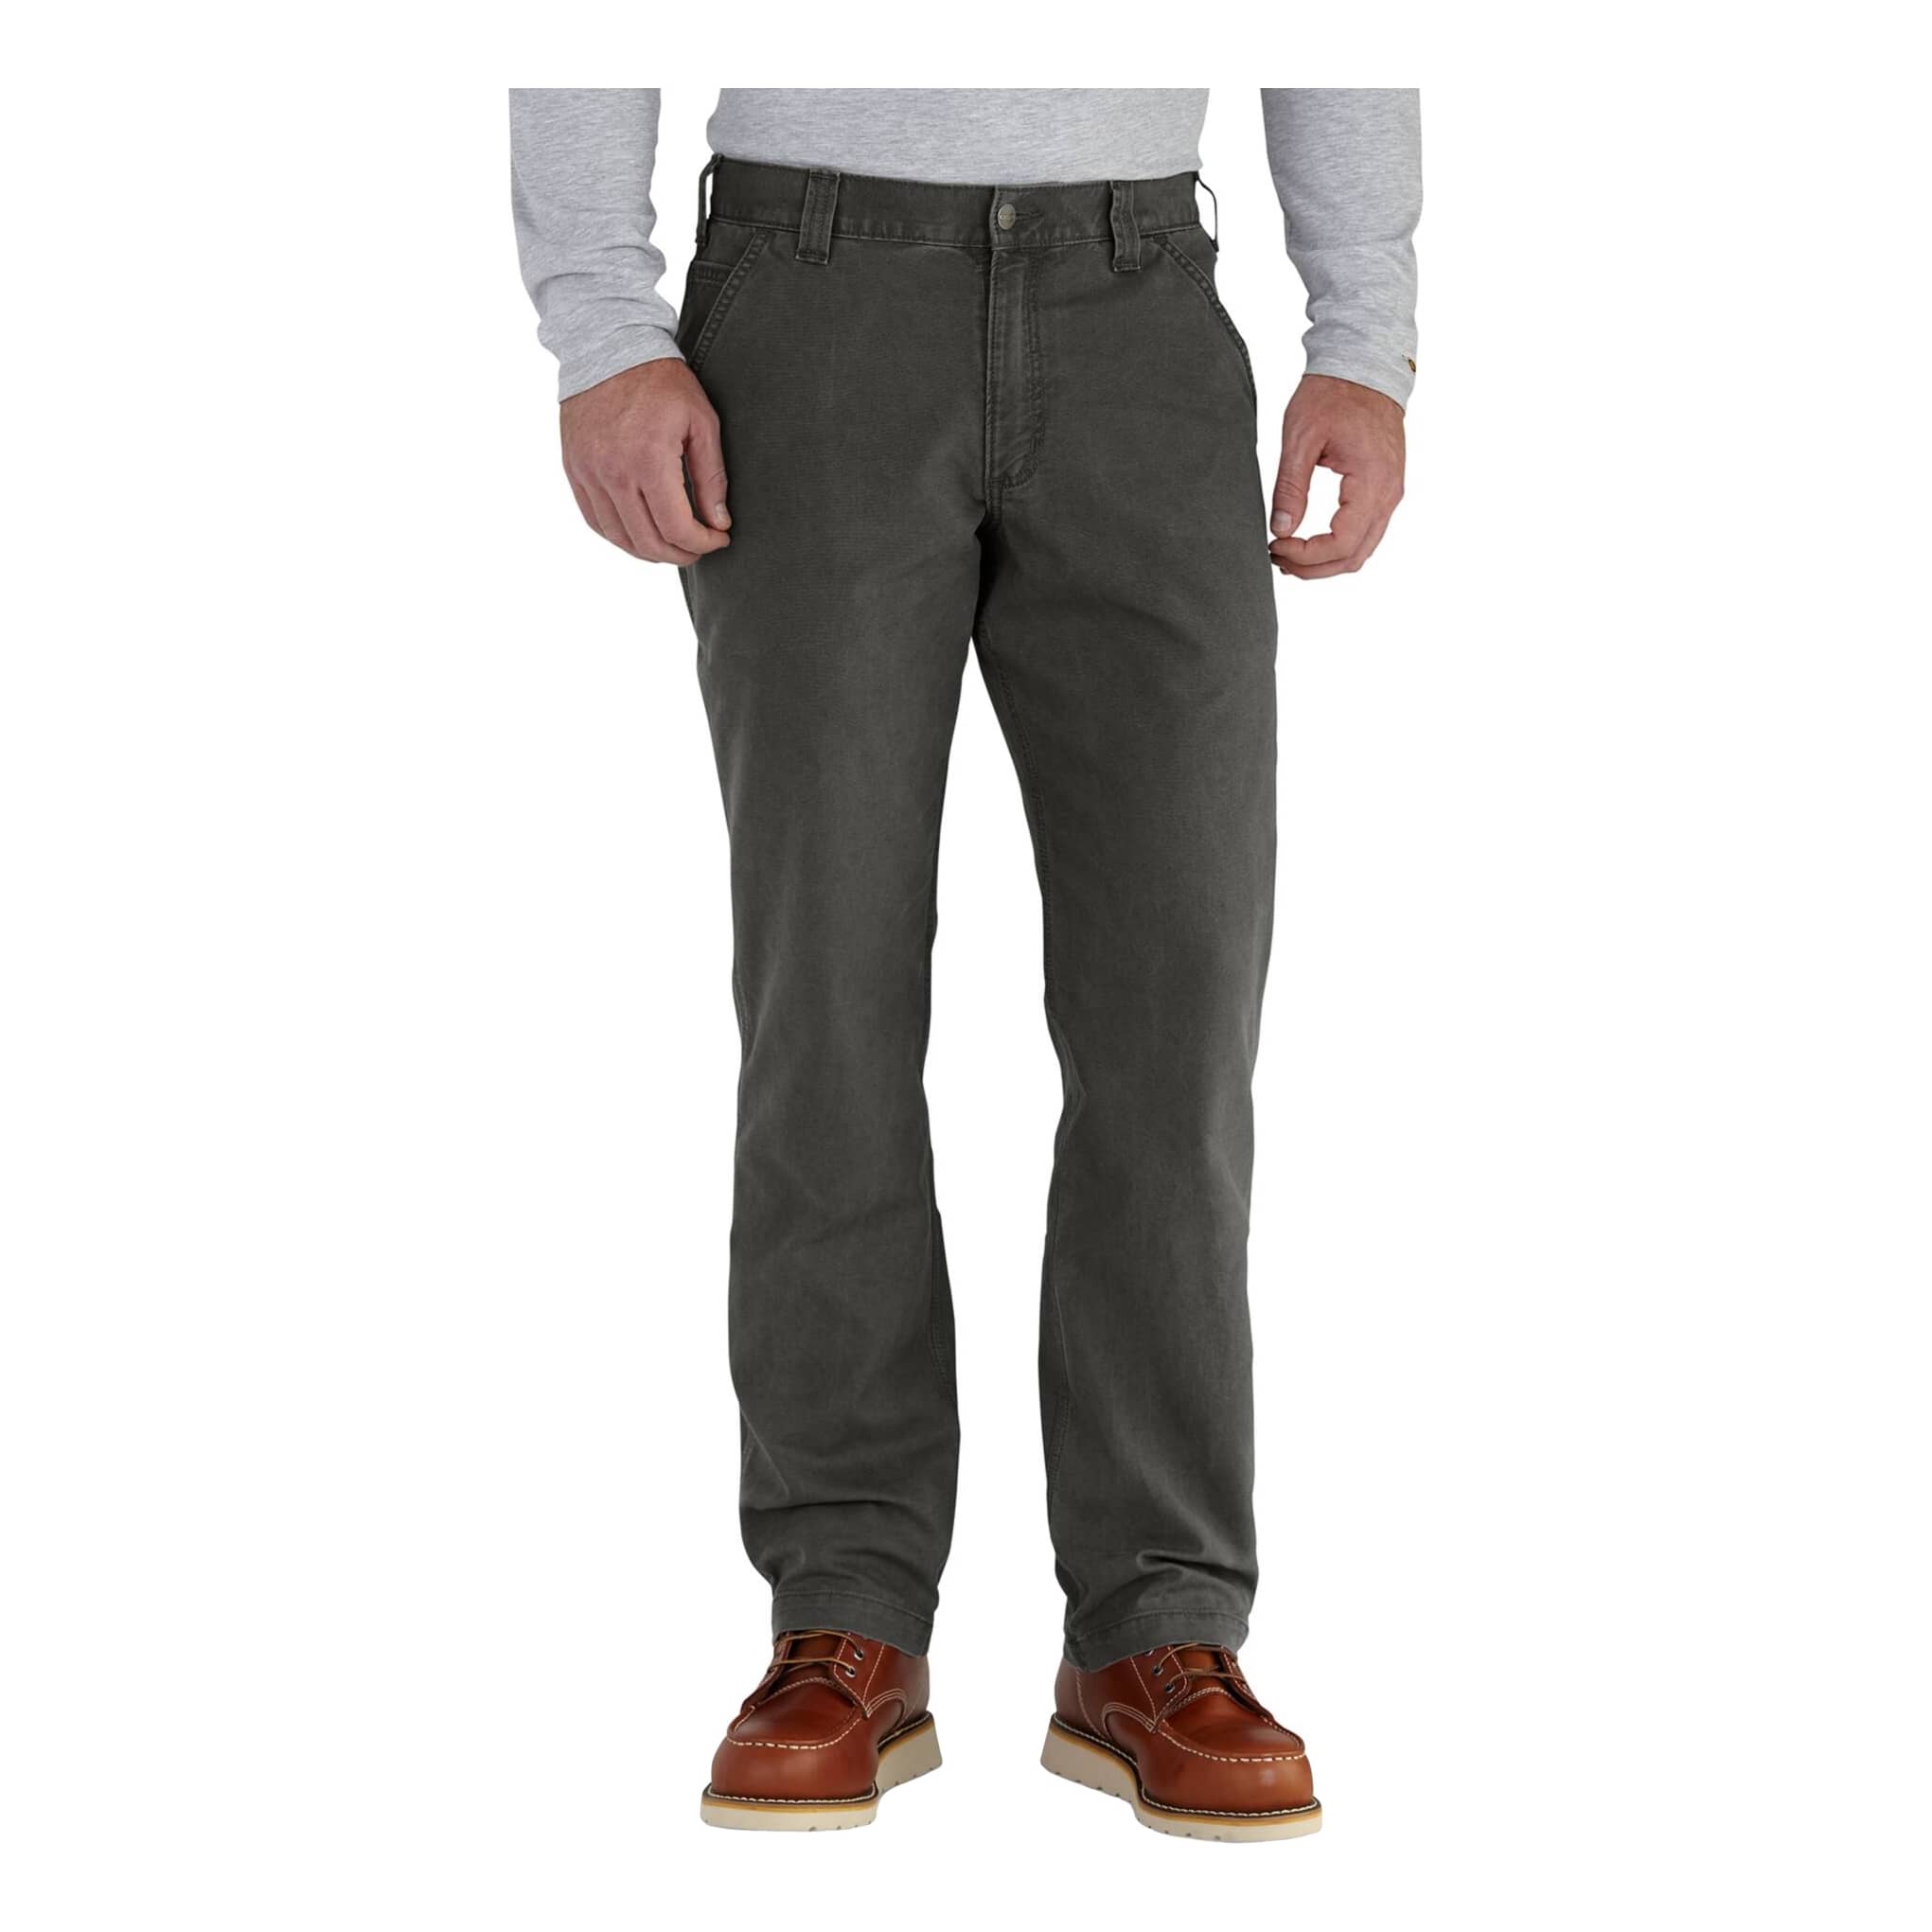 Carhartt® Men’s Rugged Flex® Relaxed Fit Canvas Work Pant - Peat